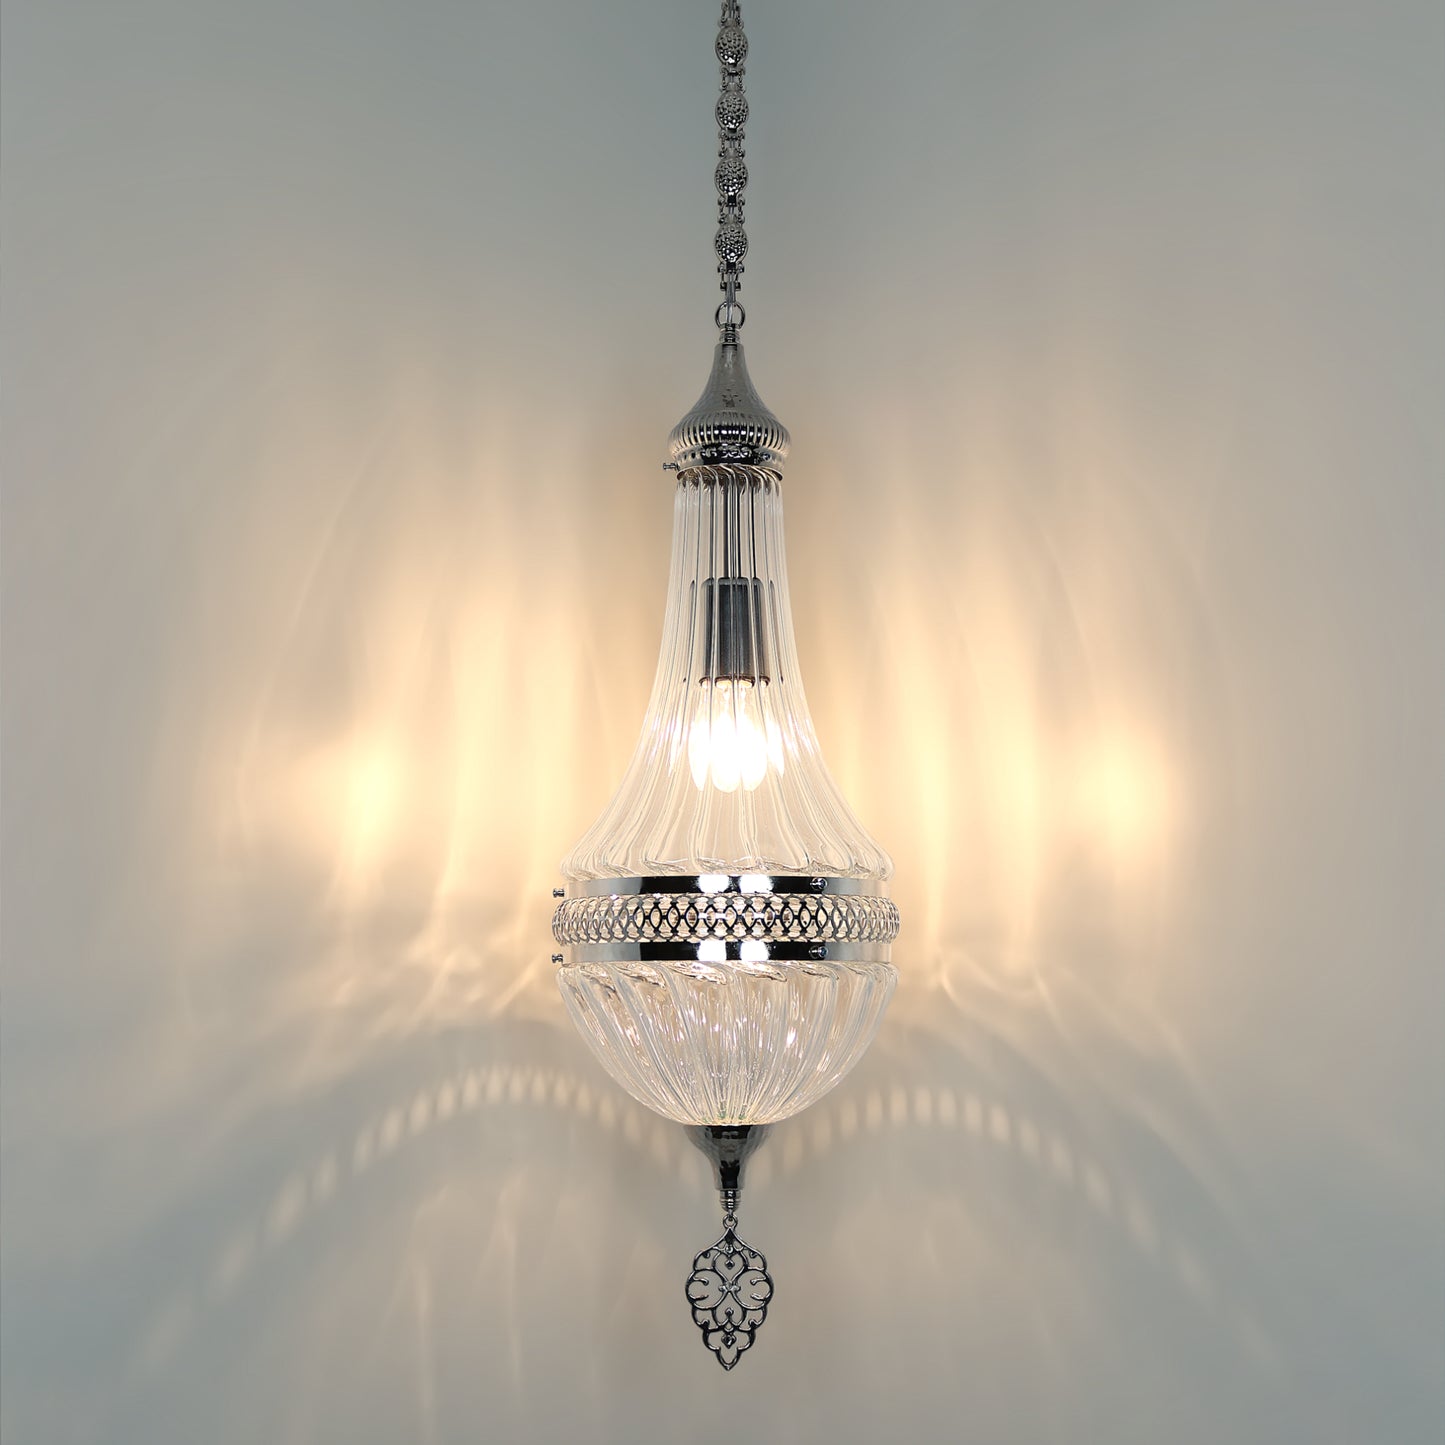 Turkish Clear Glass Pendant Lamp Handcrafted Pyrex Lamp